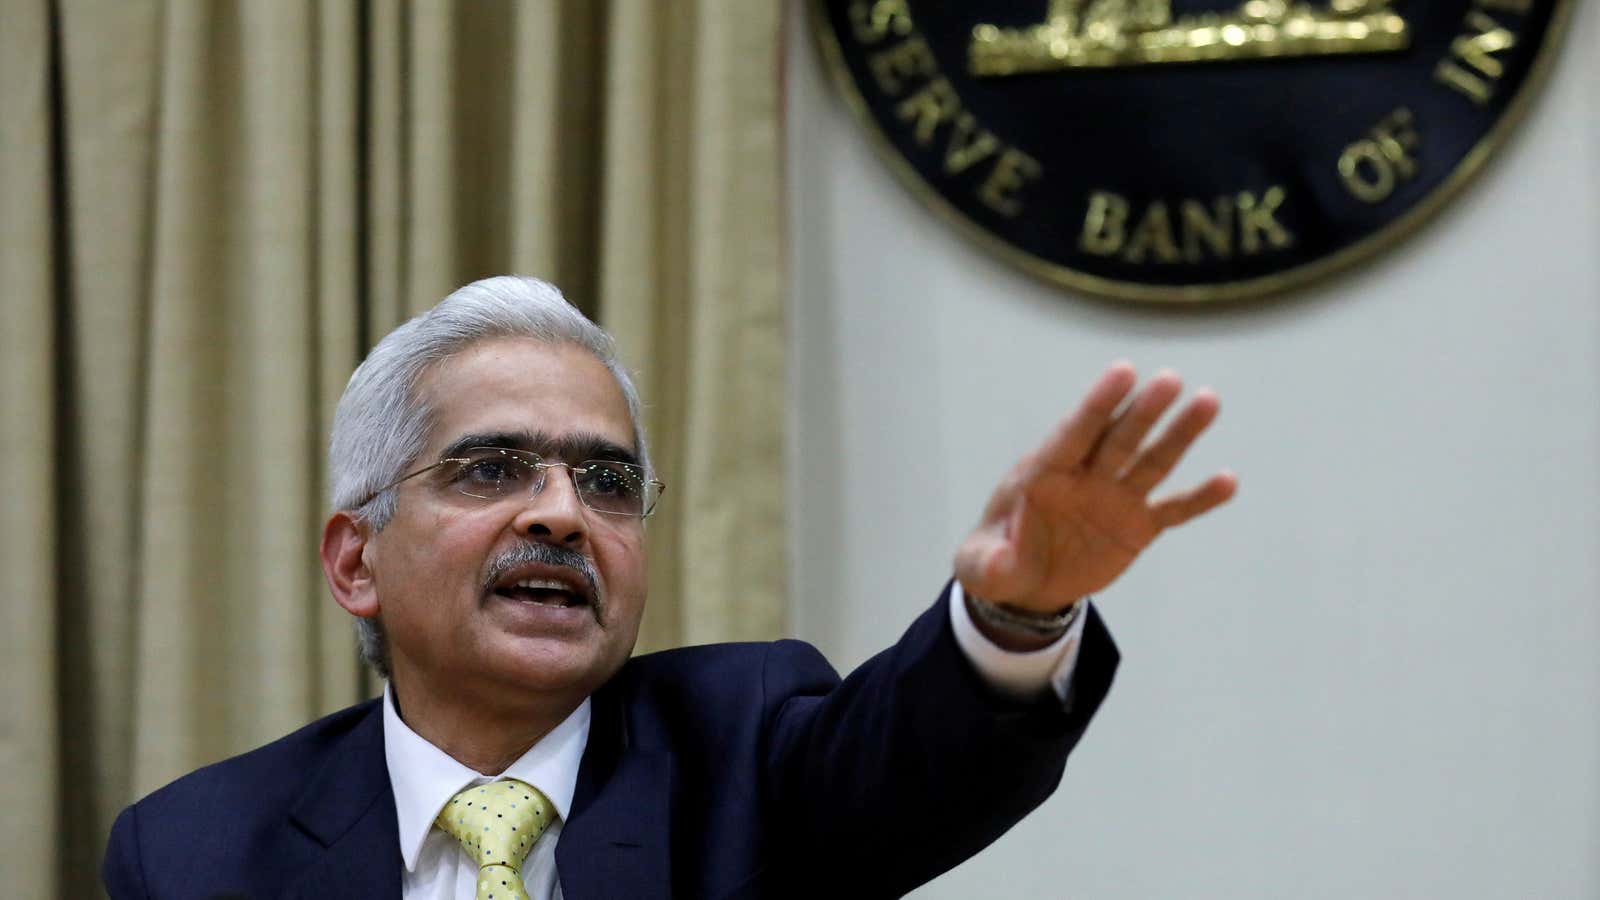 FILE PHOTO: Shaktikanta Das, Reserve Bank of India (RBI) Governor, gestures as he attends a news conference in Mumbai, India, December 12, 2018. REUTERS/Danish Siddiqui/File…